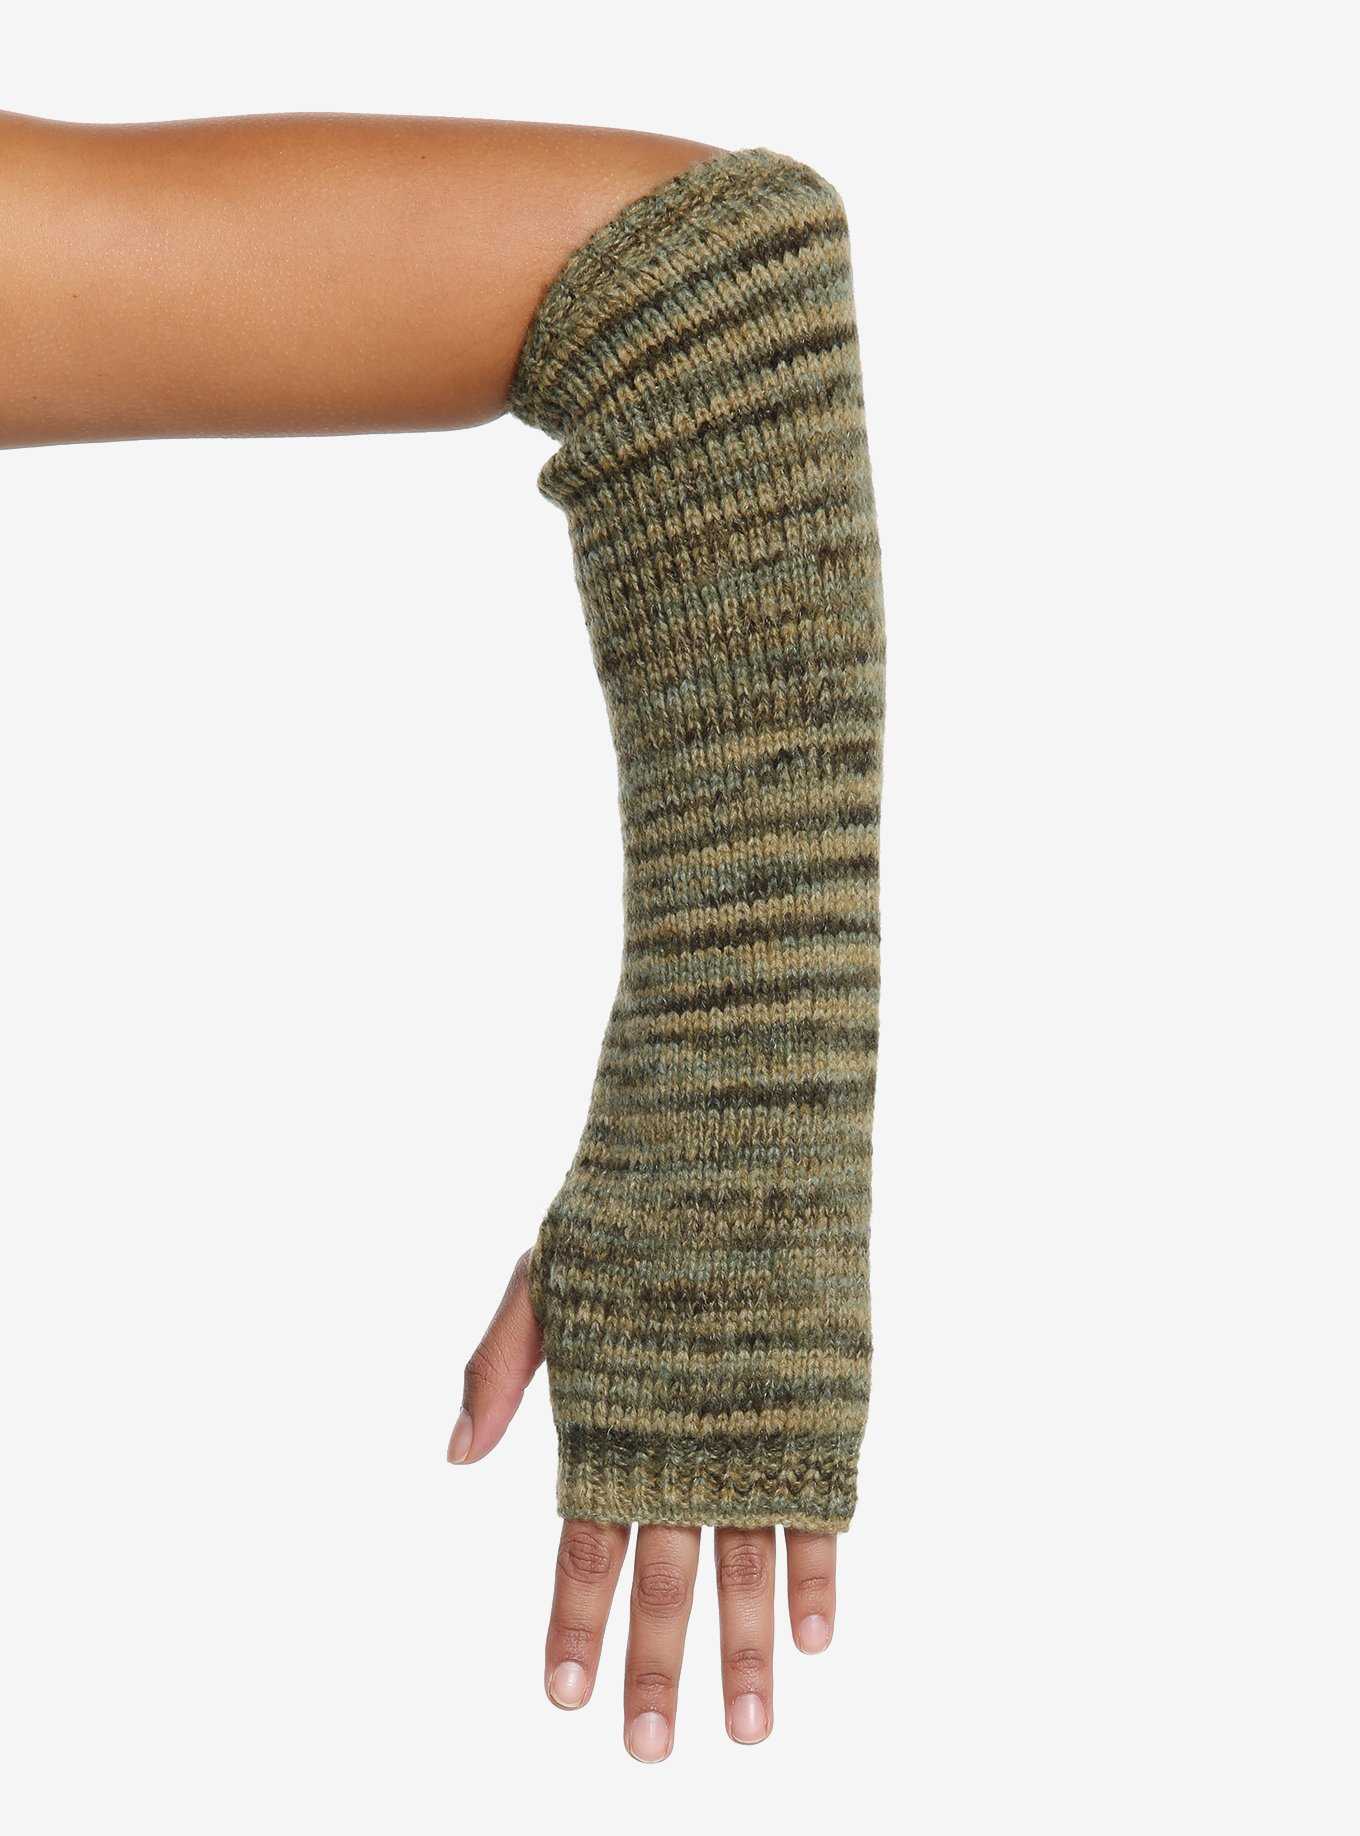 Green & Brown Knit Arm Warmers, , hi-res